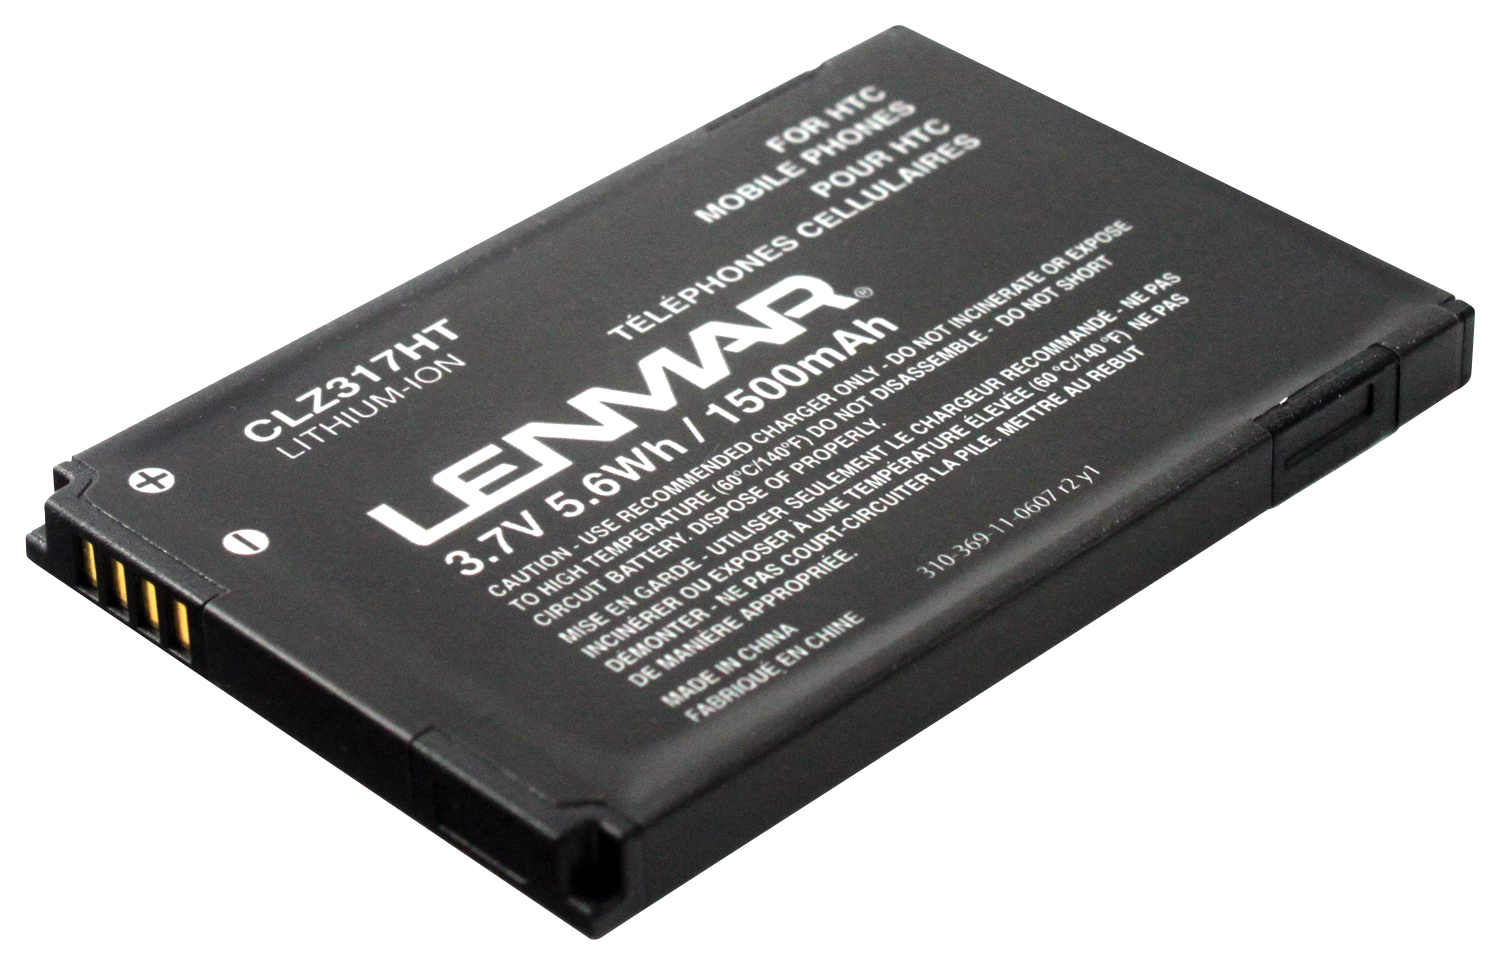  Lenmar - Lithium-Ion Battery for Select HTC Mobile Phones